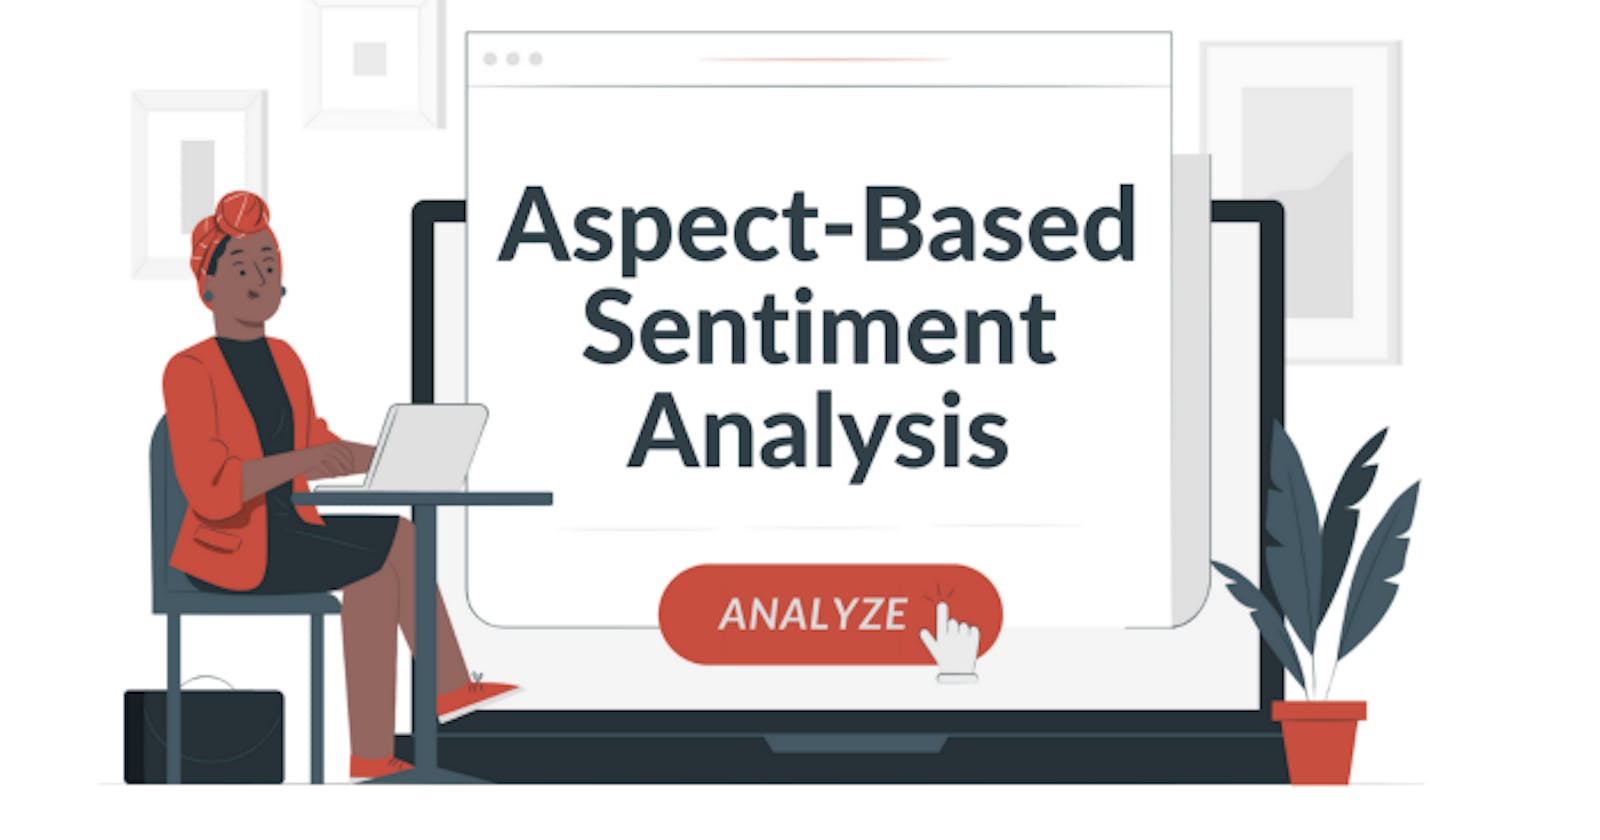 Aspect-Based Sentiment Analysis in a Nutshell